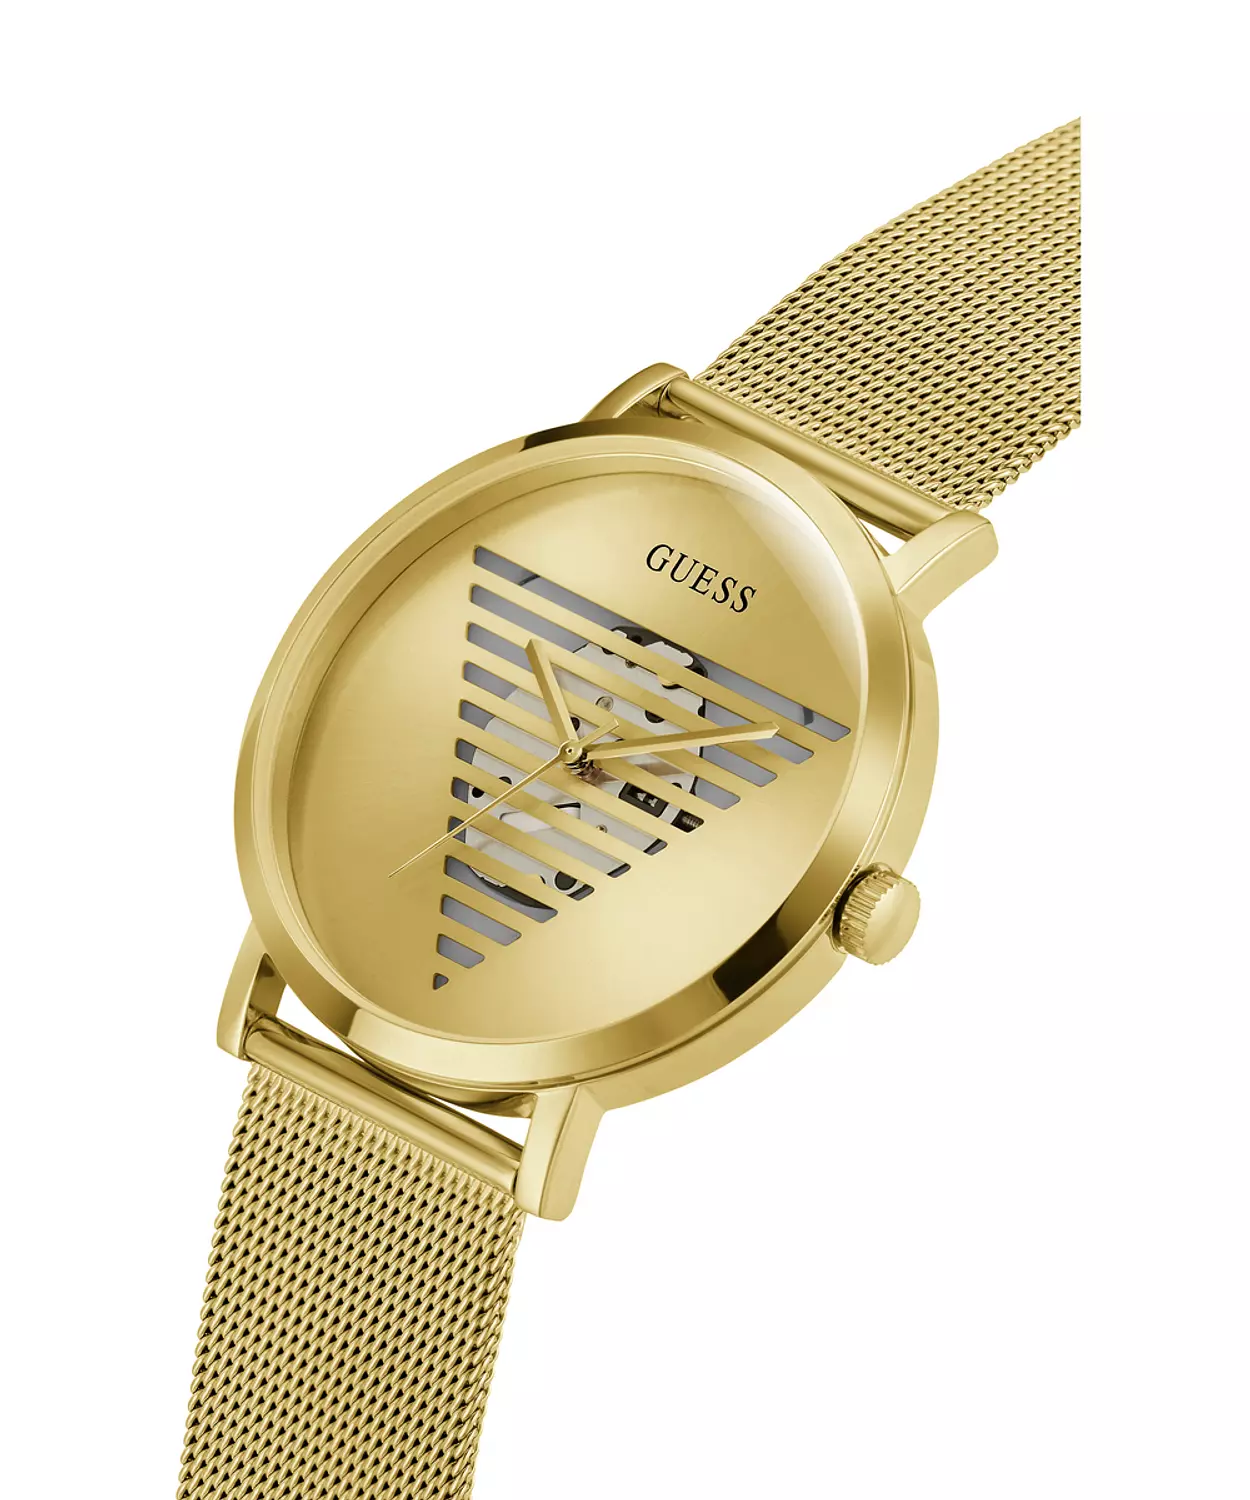 GUESS GW0502G1 ANALOG WATCH For Men Round Shape Gold Stainless Steel/Mesh Polished Bracelet 2